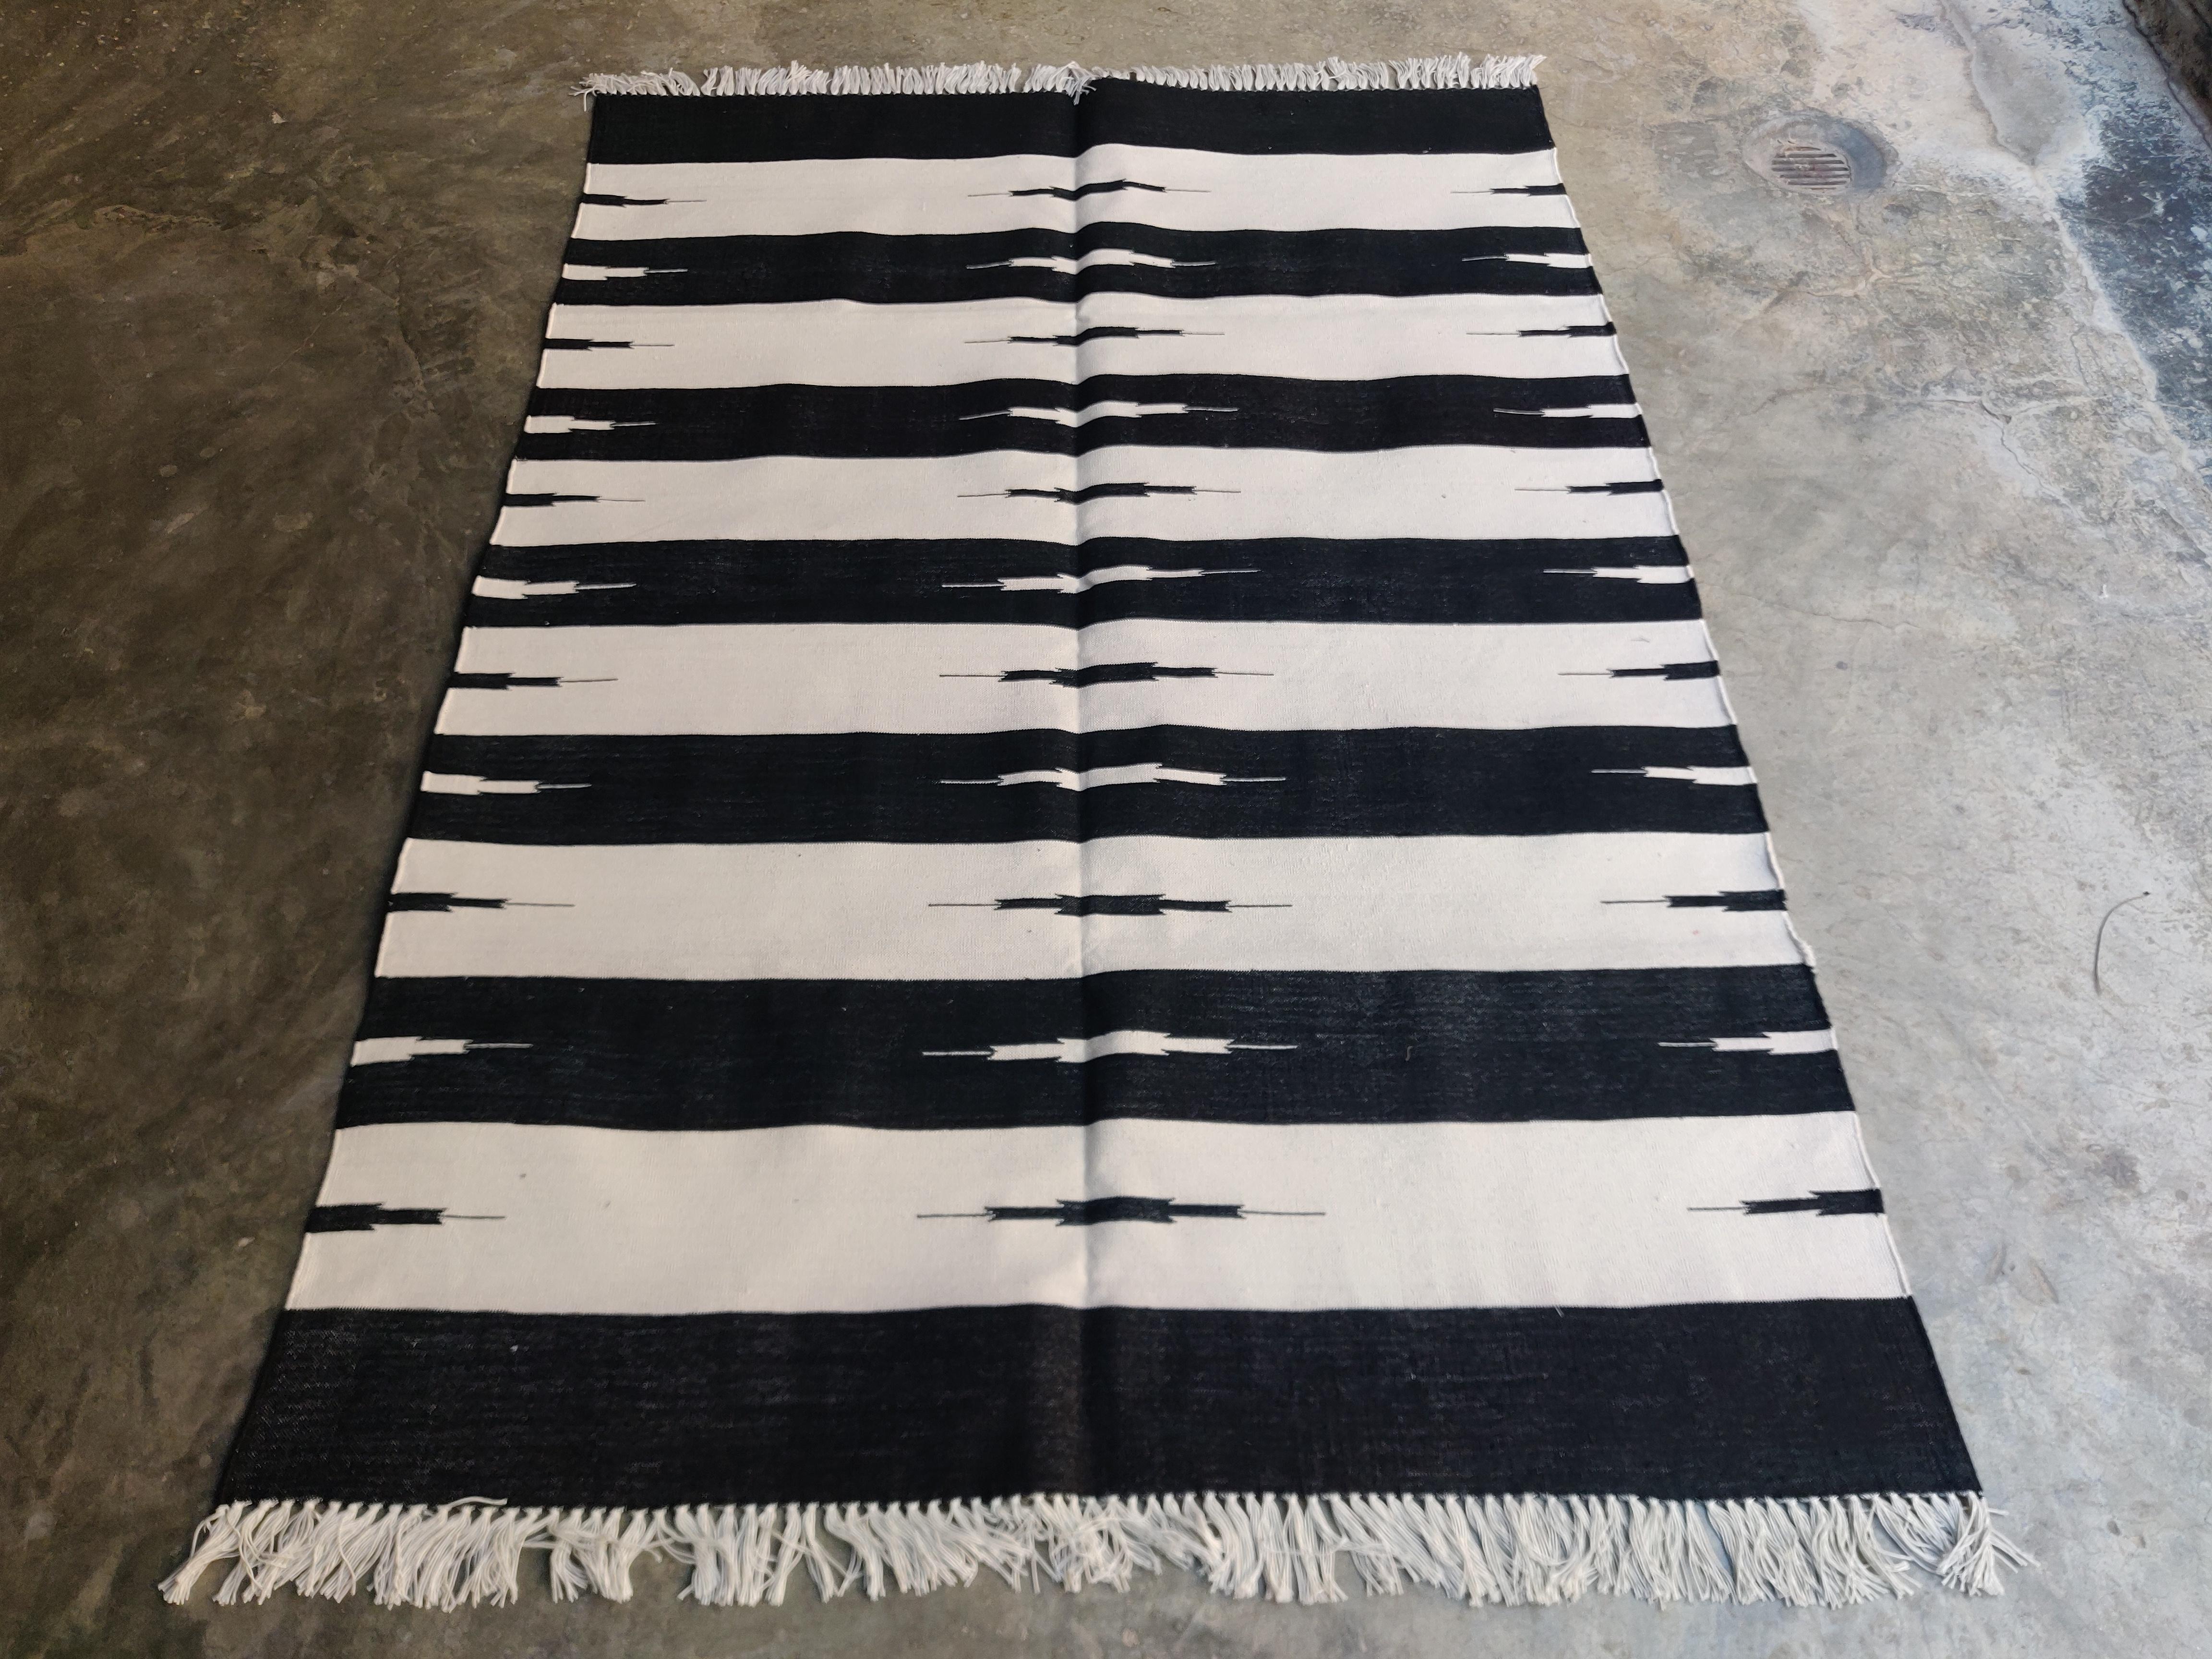 Hand-Woven Handmade Cotton Area Flat Weave Rug, 4x6 Black And White Striped Indian Dhurrie For Sale